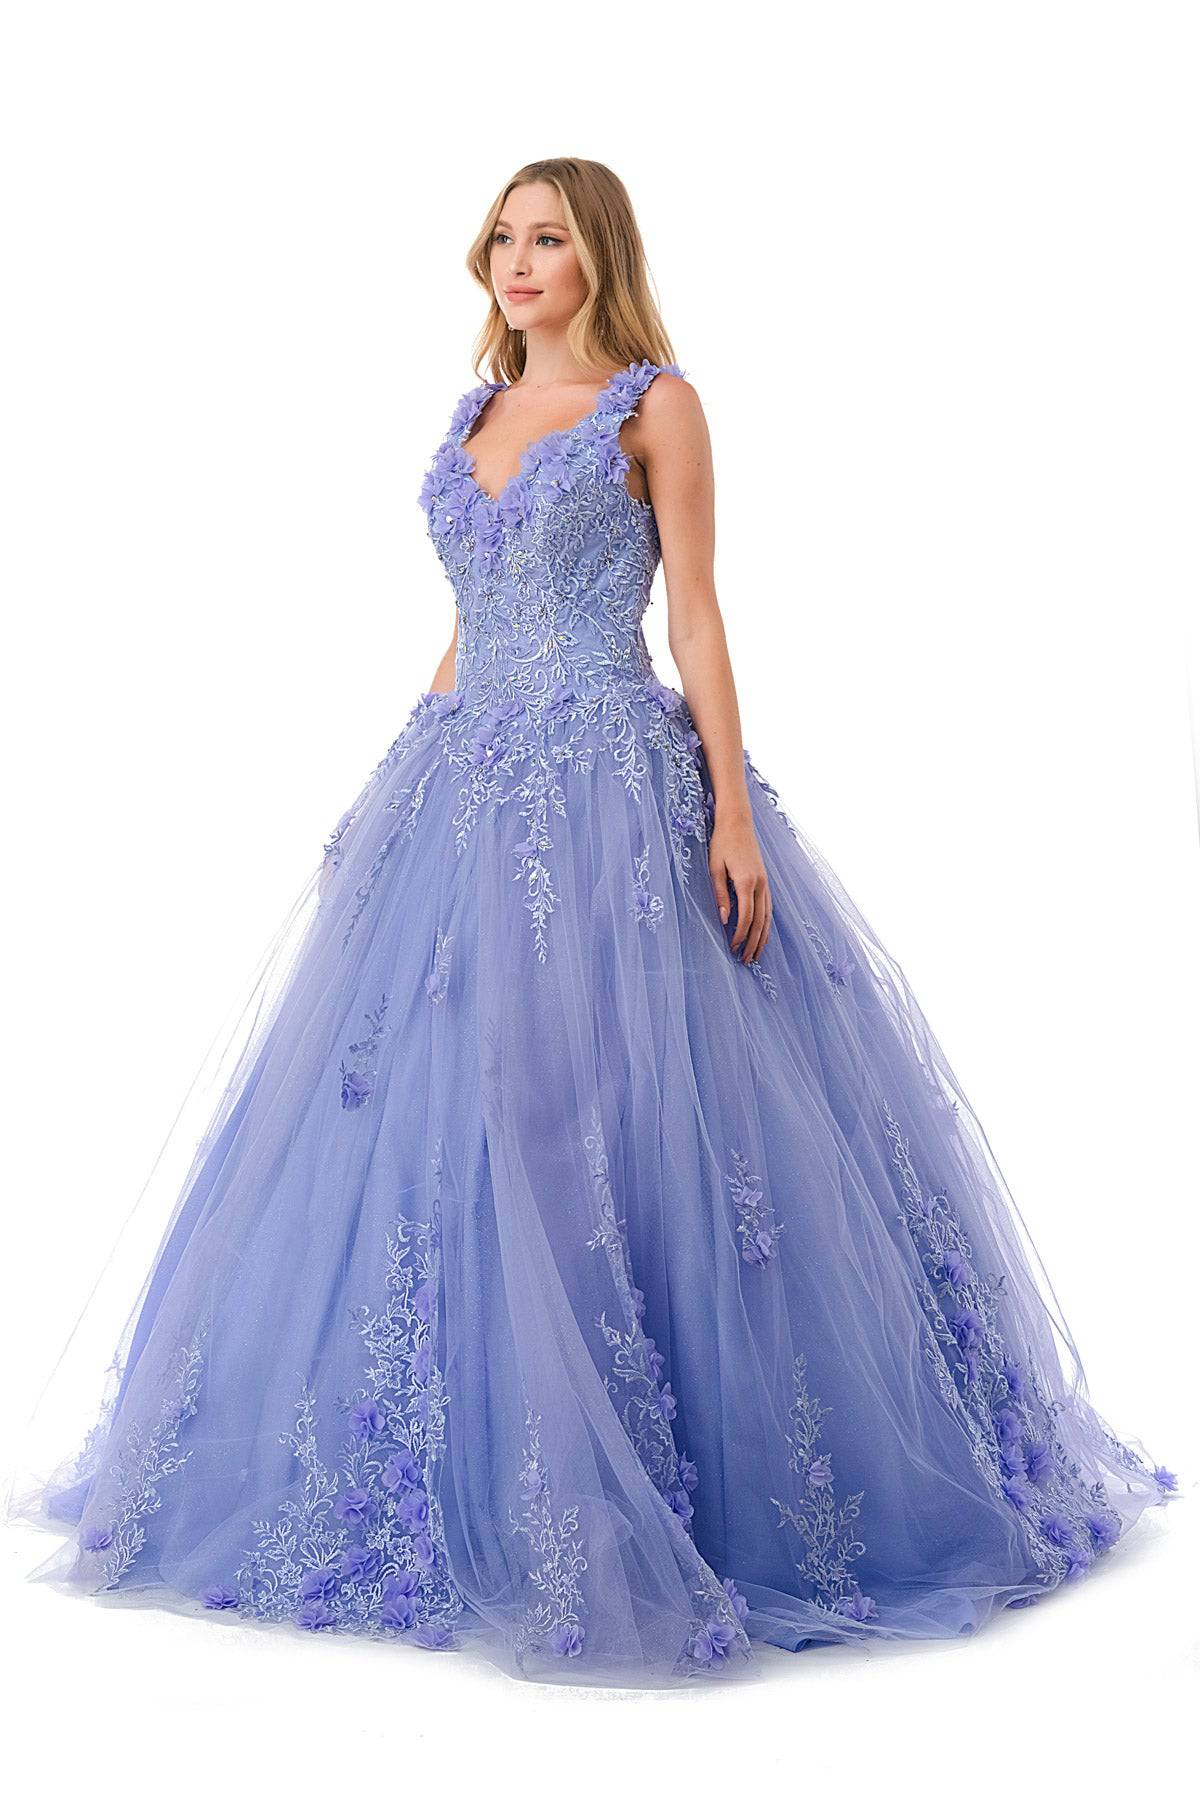 Aspeed L2729 Floral Lilac Quinceanera Dress - NORMA REED